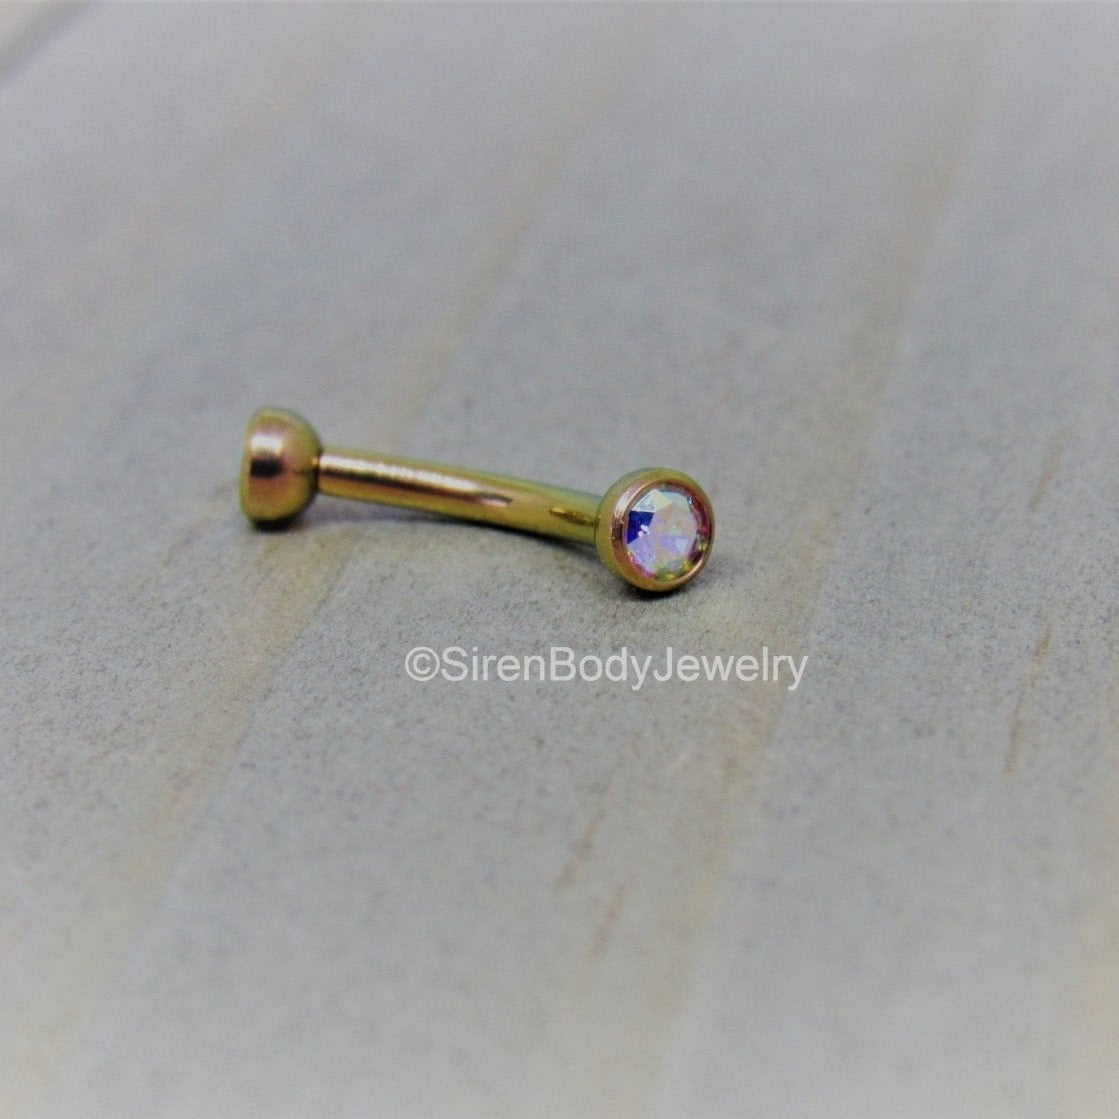 16g titanium anodized rook piercing curved barbell earring